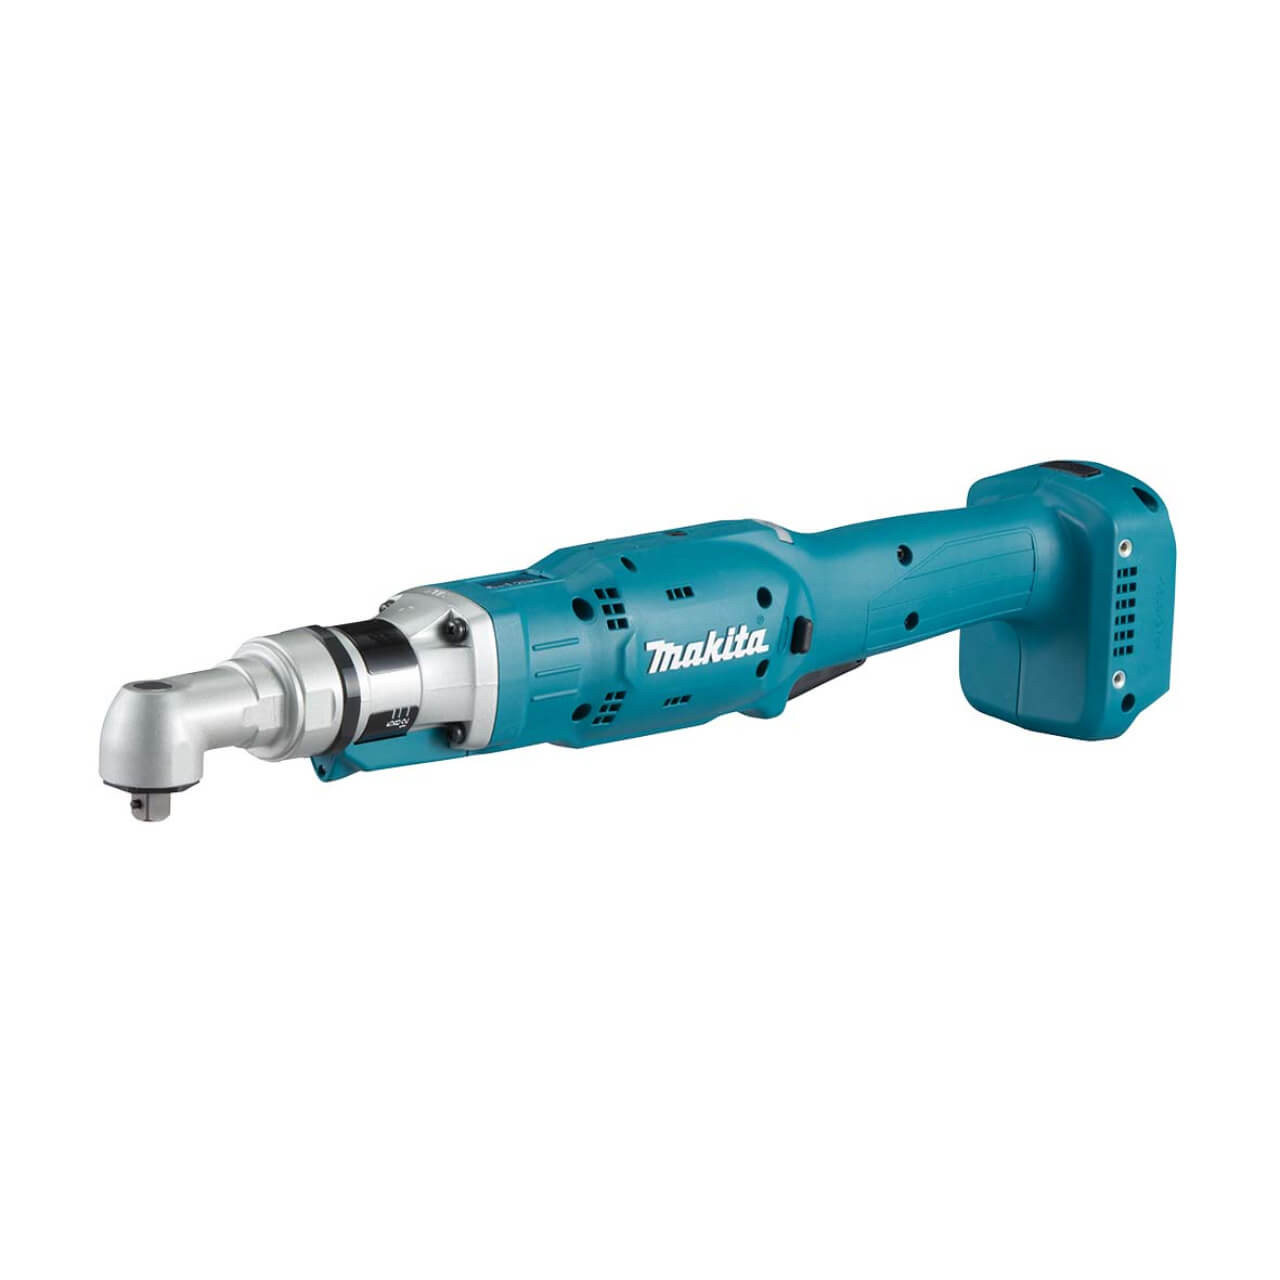 Makita 14.4V BRUSHLESS 3/8” Angled Torque Wrench. 5-12Nm. 100-700rpm - Tool Only